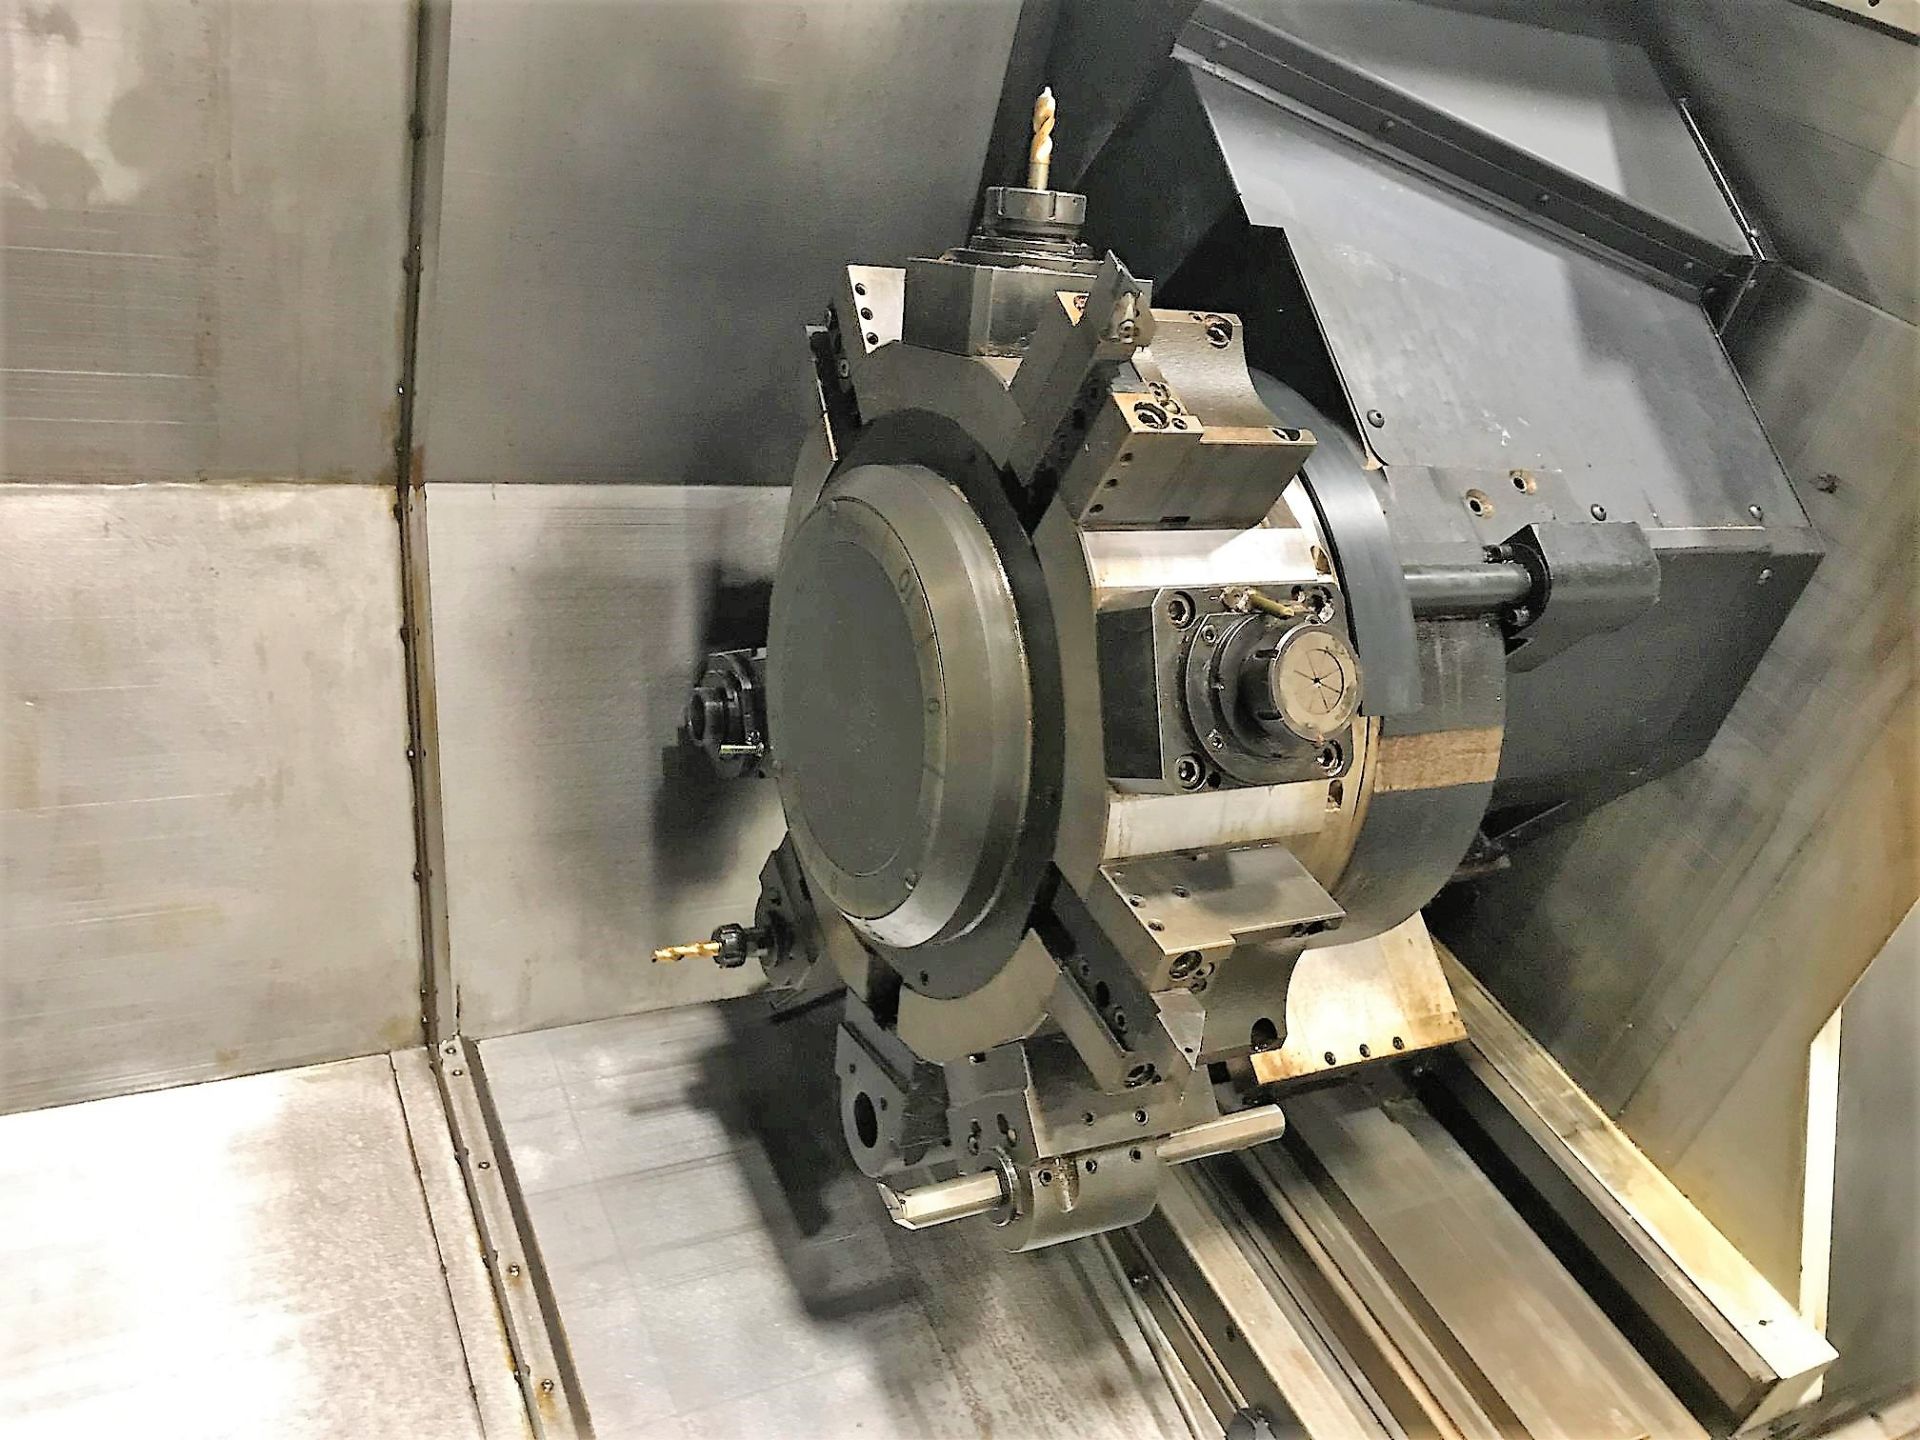 16.5" x 120" Mori Seiki NL3000Y/3000 CNC Turning Center Lathe w/Milling & Y-Axis, S/N 11986, New 201 - Image 6 of 17